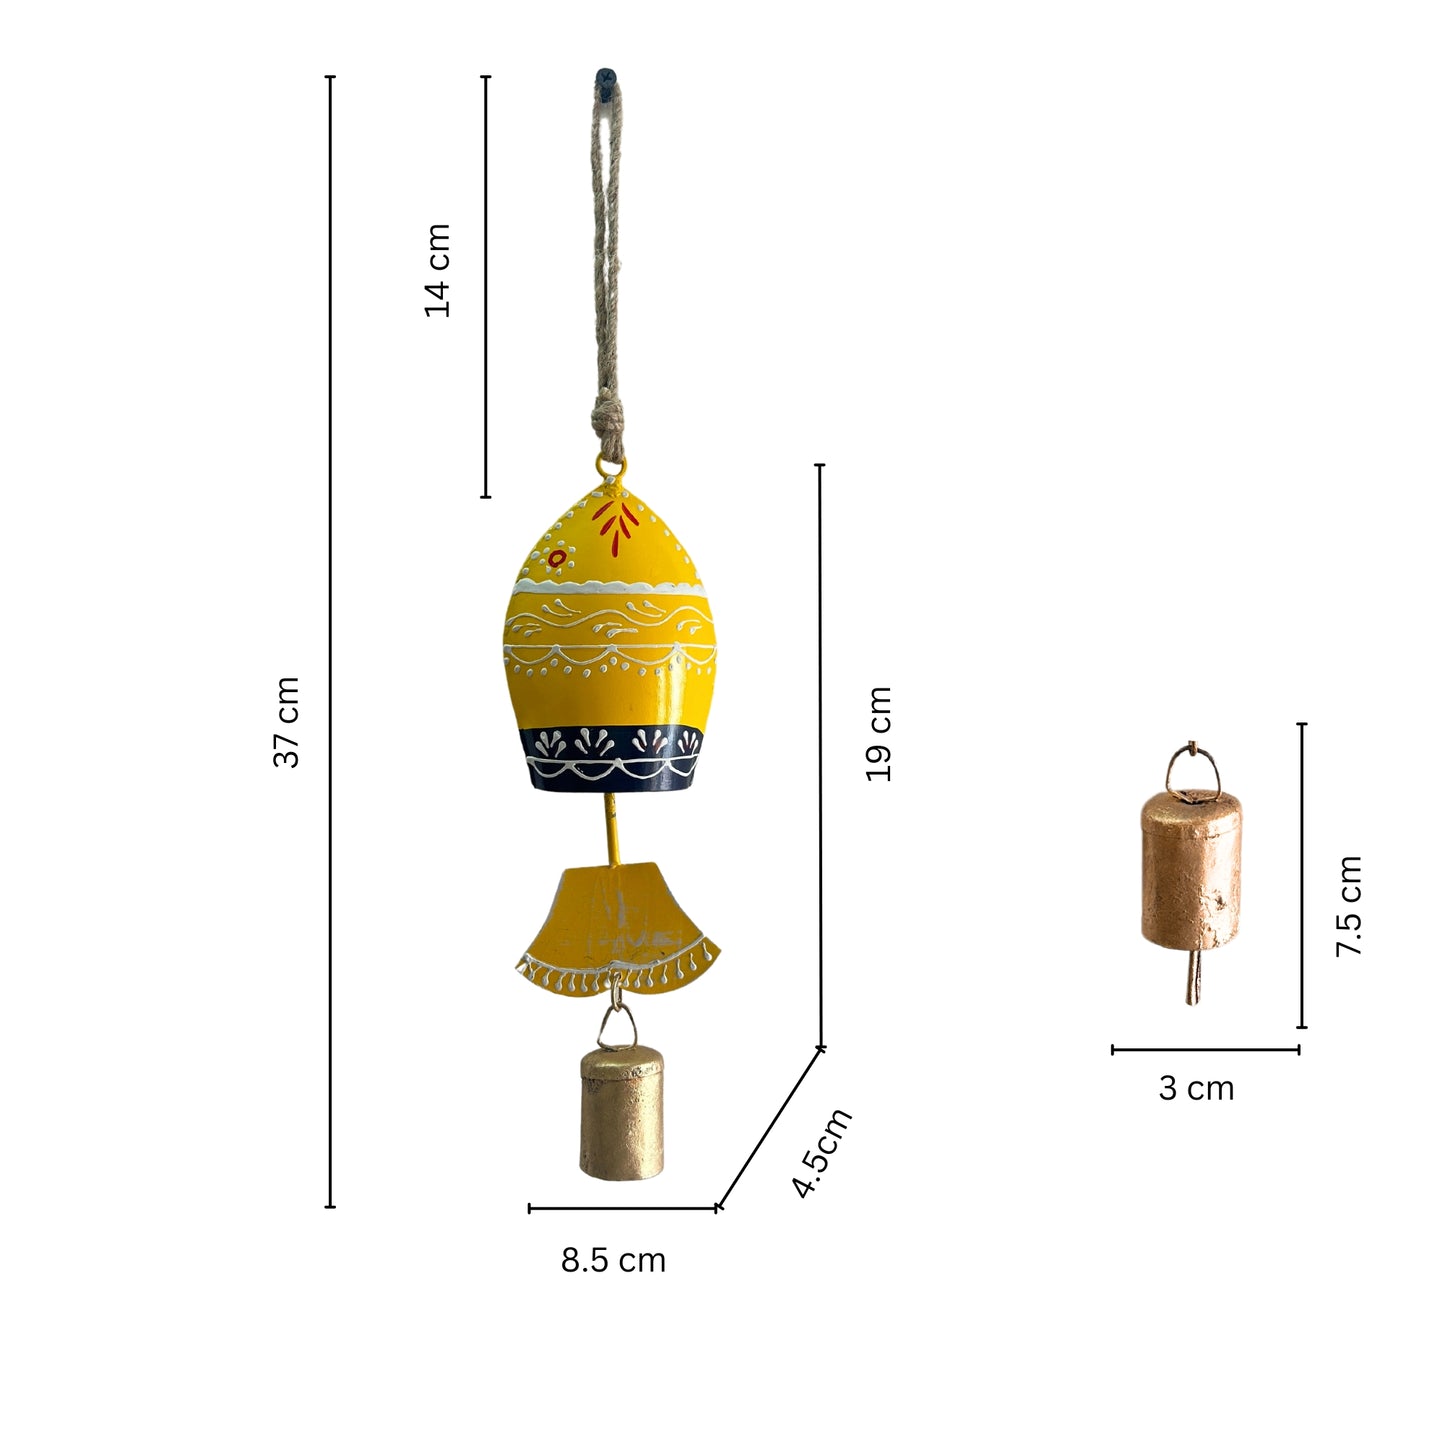 Fish Wind Chimes for Home Balcony with Sound - Yellow